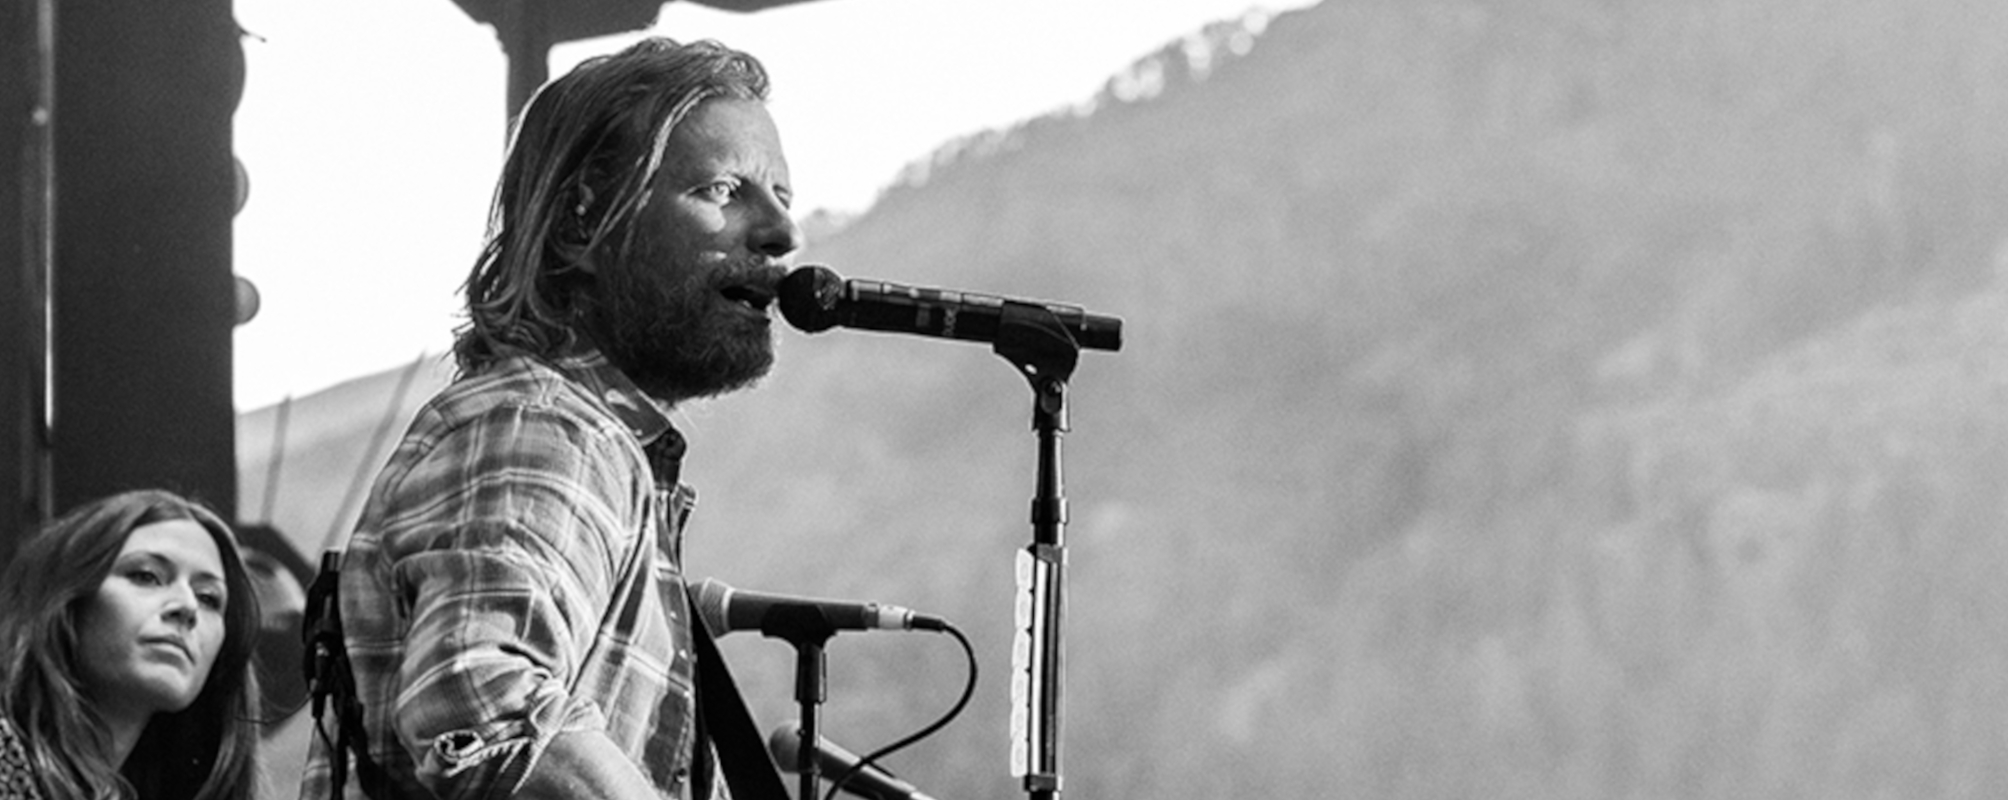 Dierks Bentley Brings 2021 Telluride Bluegrass Experience to Surprise ‘Live From Telluride’ EP Ft. Larkin Poe and The War & Treaty